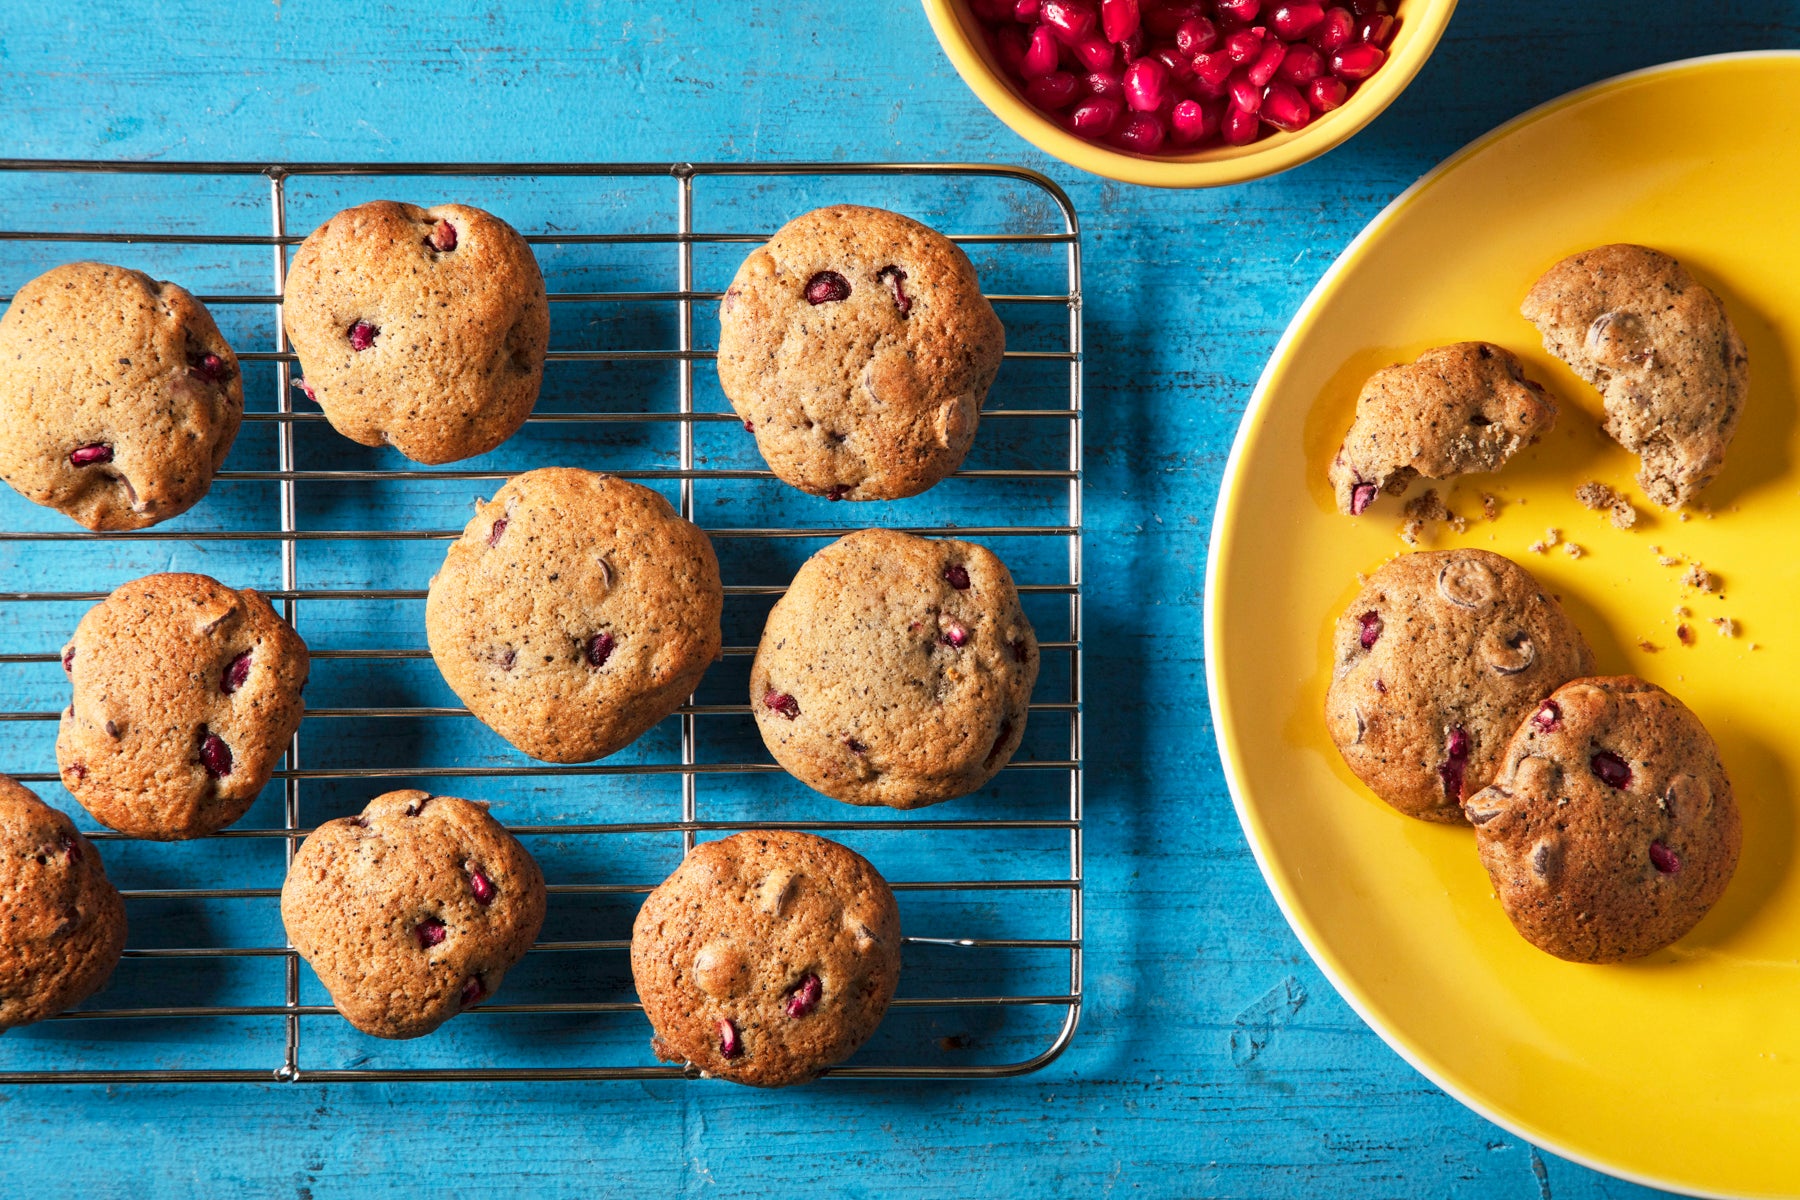 Pomegranate and Coffee Chocolate Chip Cookies